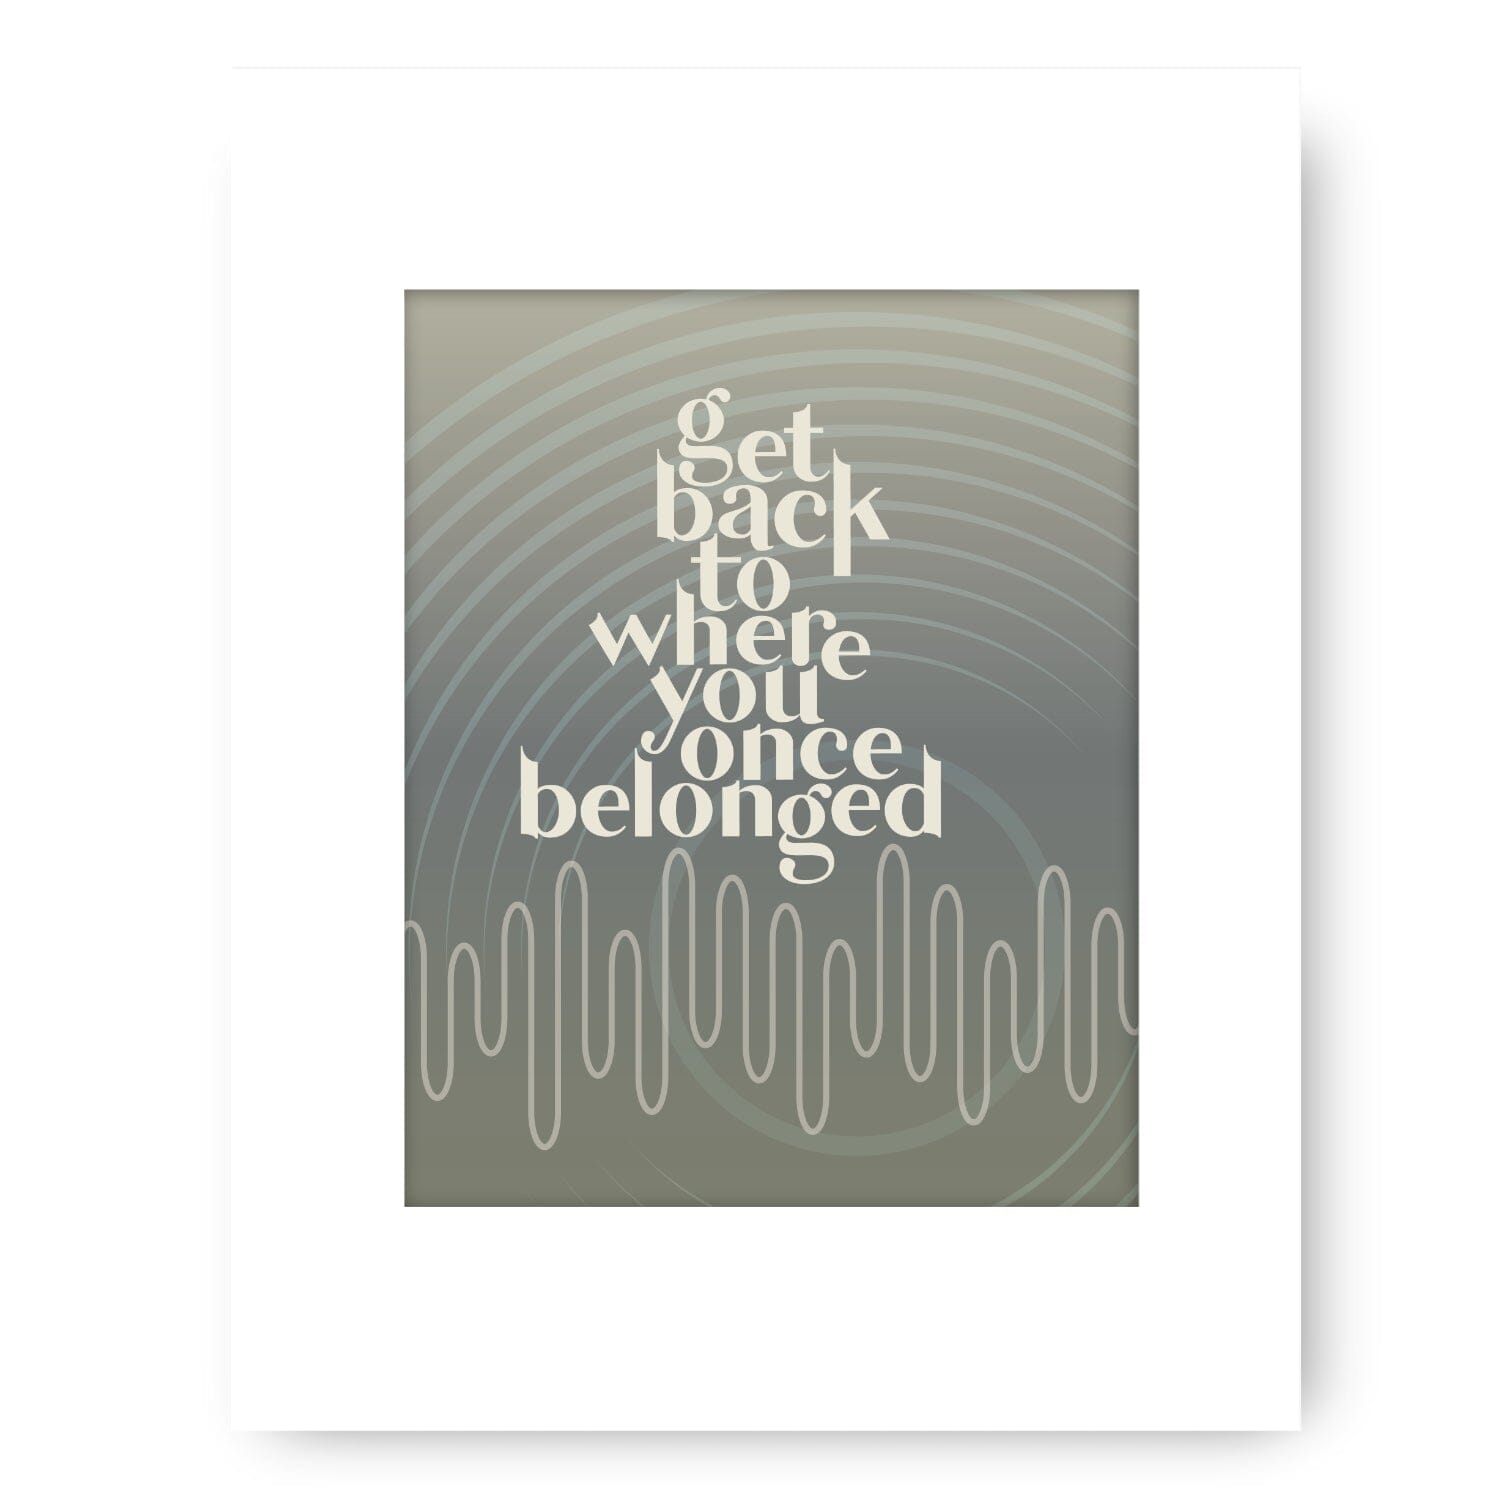 Get Back by the Beatles - Song Lyrics Music Art Print Poster Song Lyrics Art Song Lyrics Art 8x10 White Matted Print 